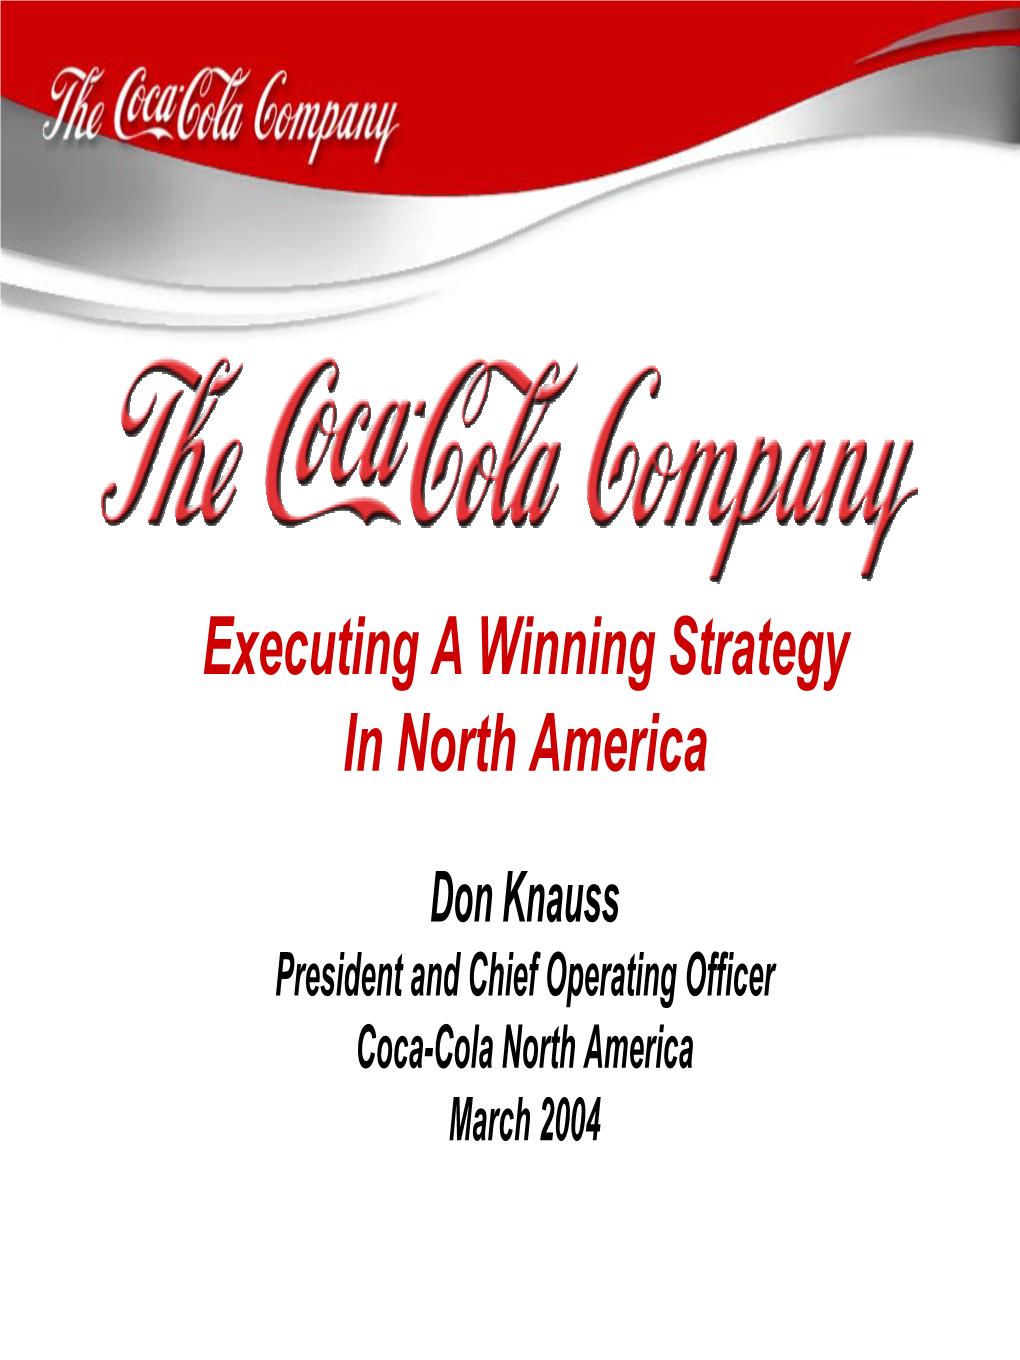 Executing a Winning Strategy in North America